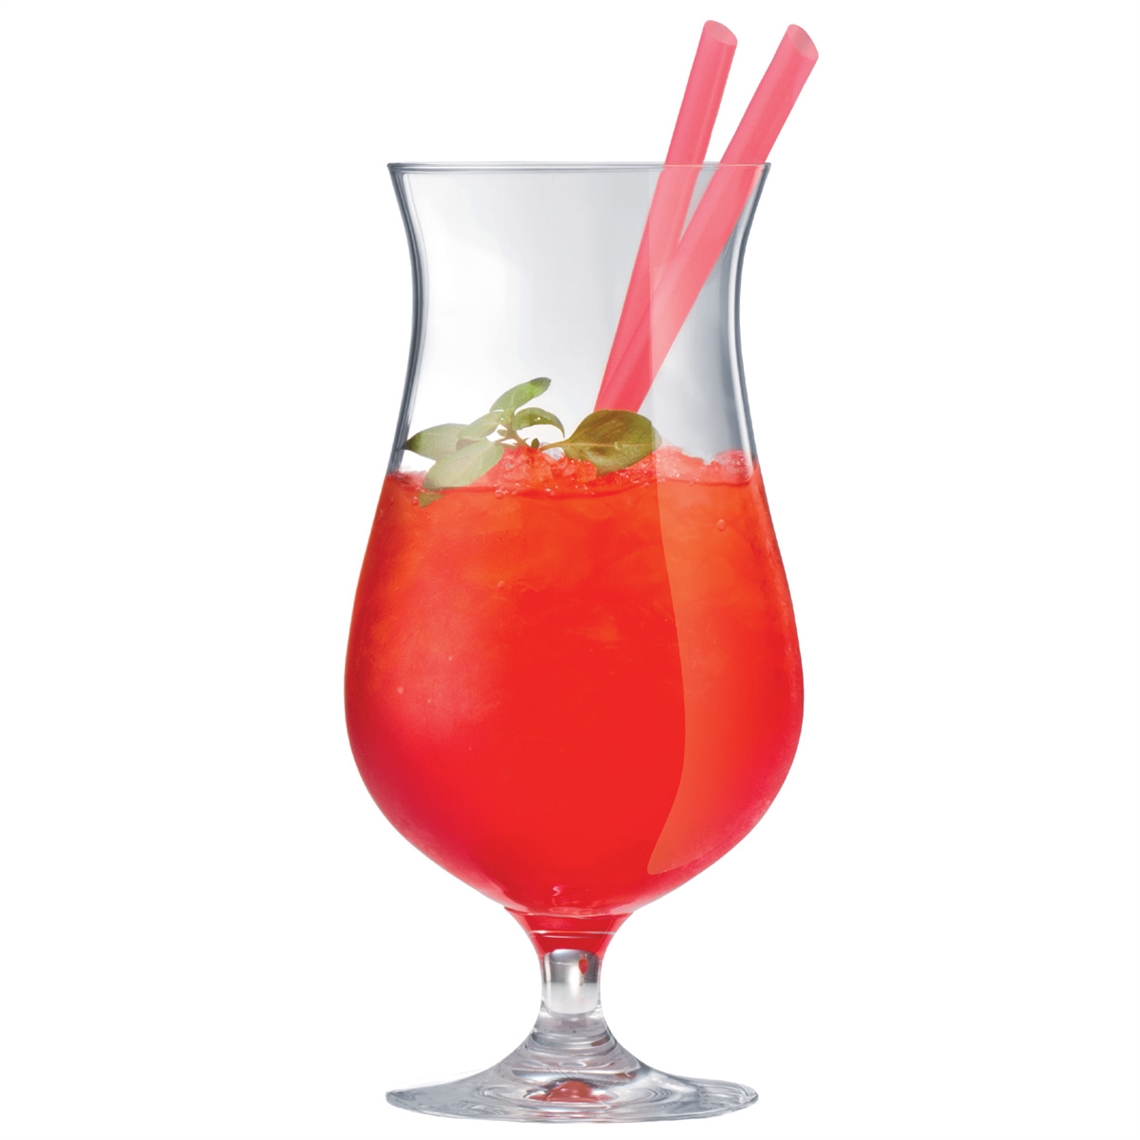 View more long drink & tumblers from our Cocktail Glasses range